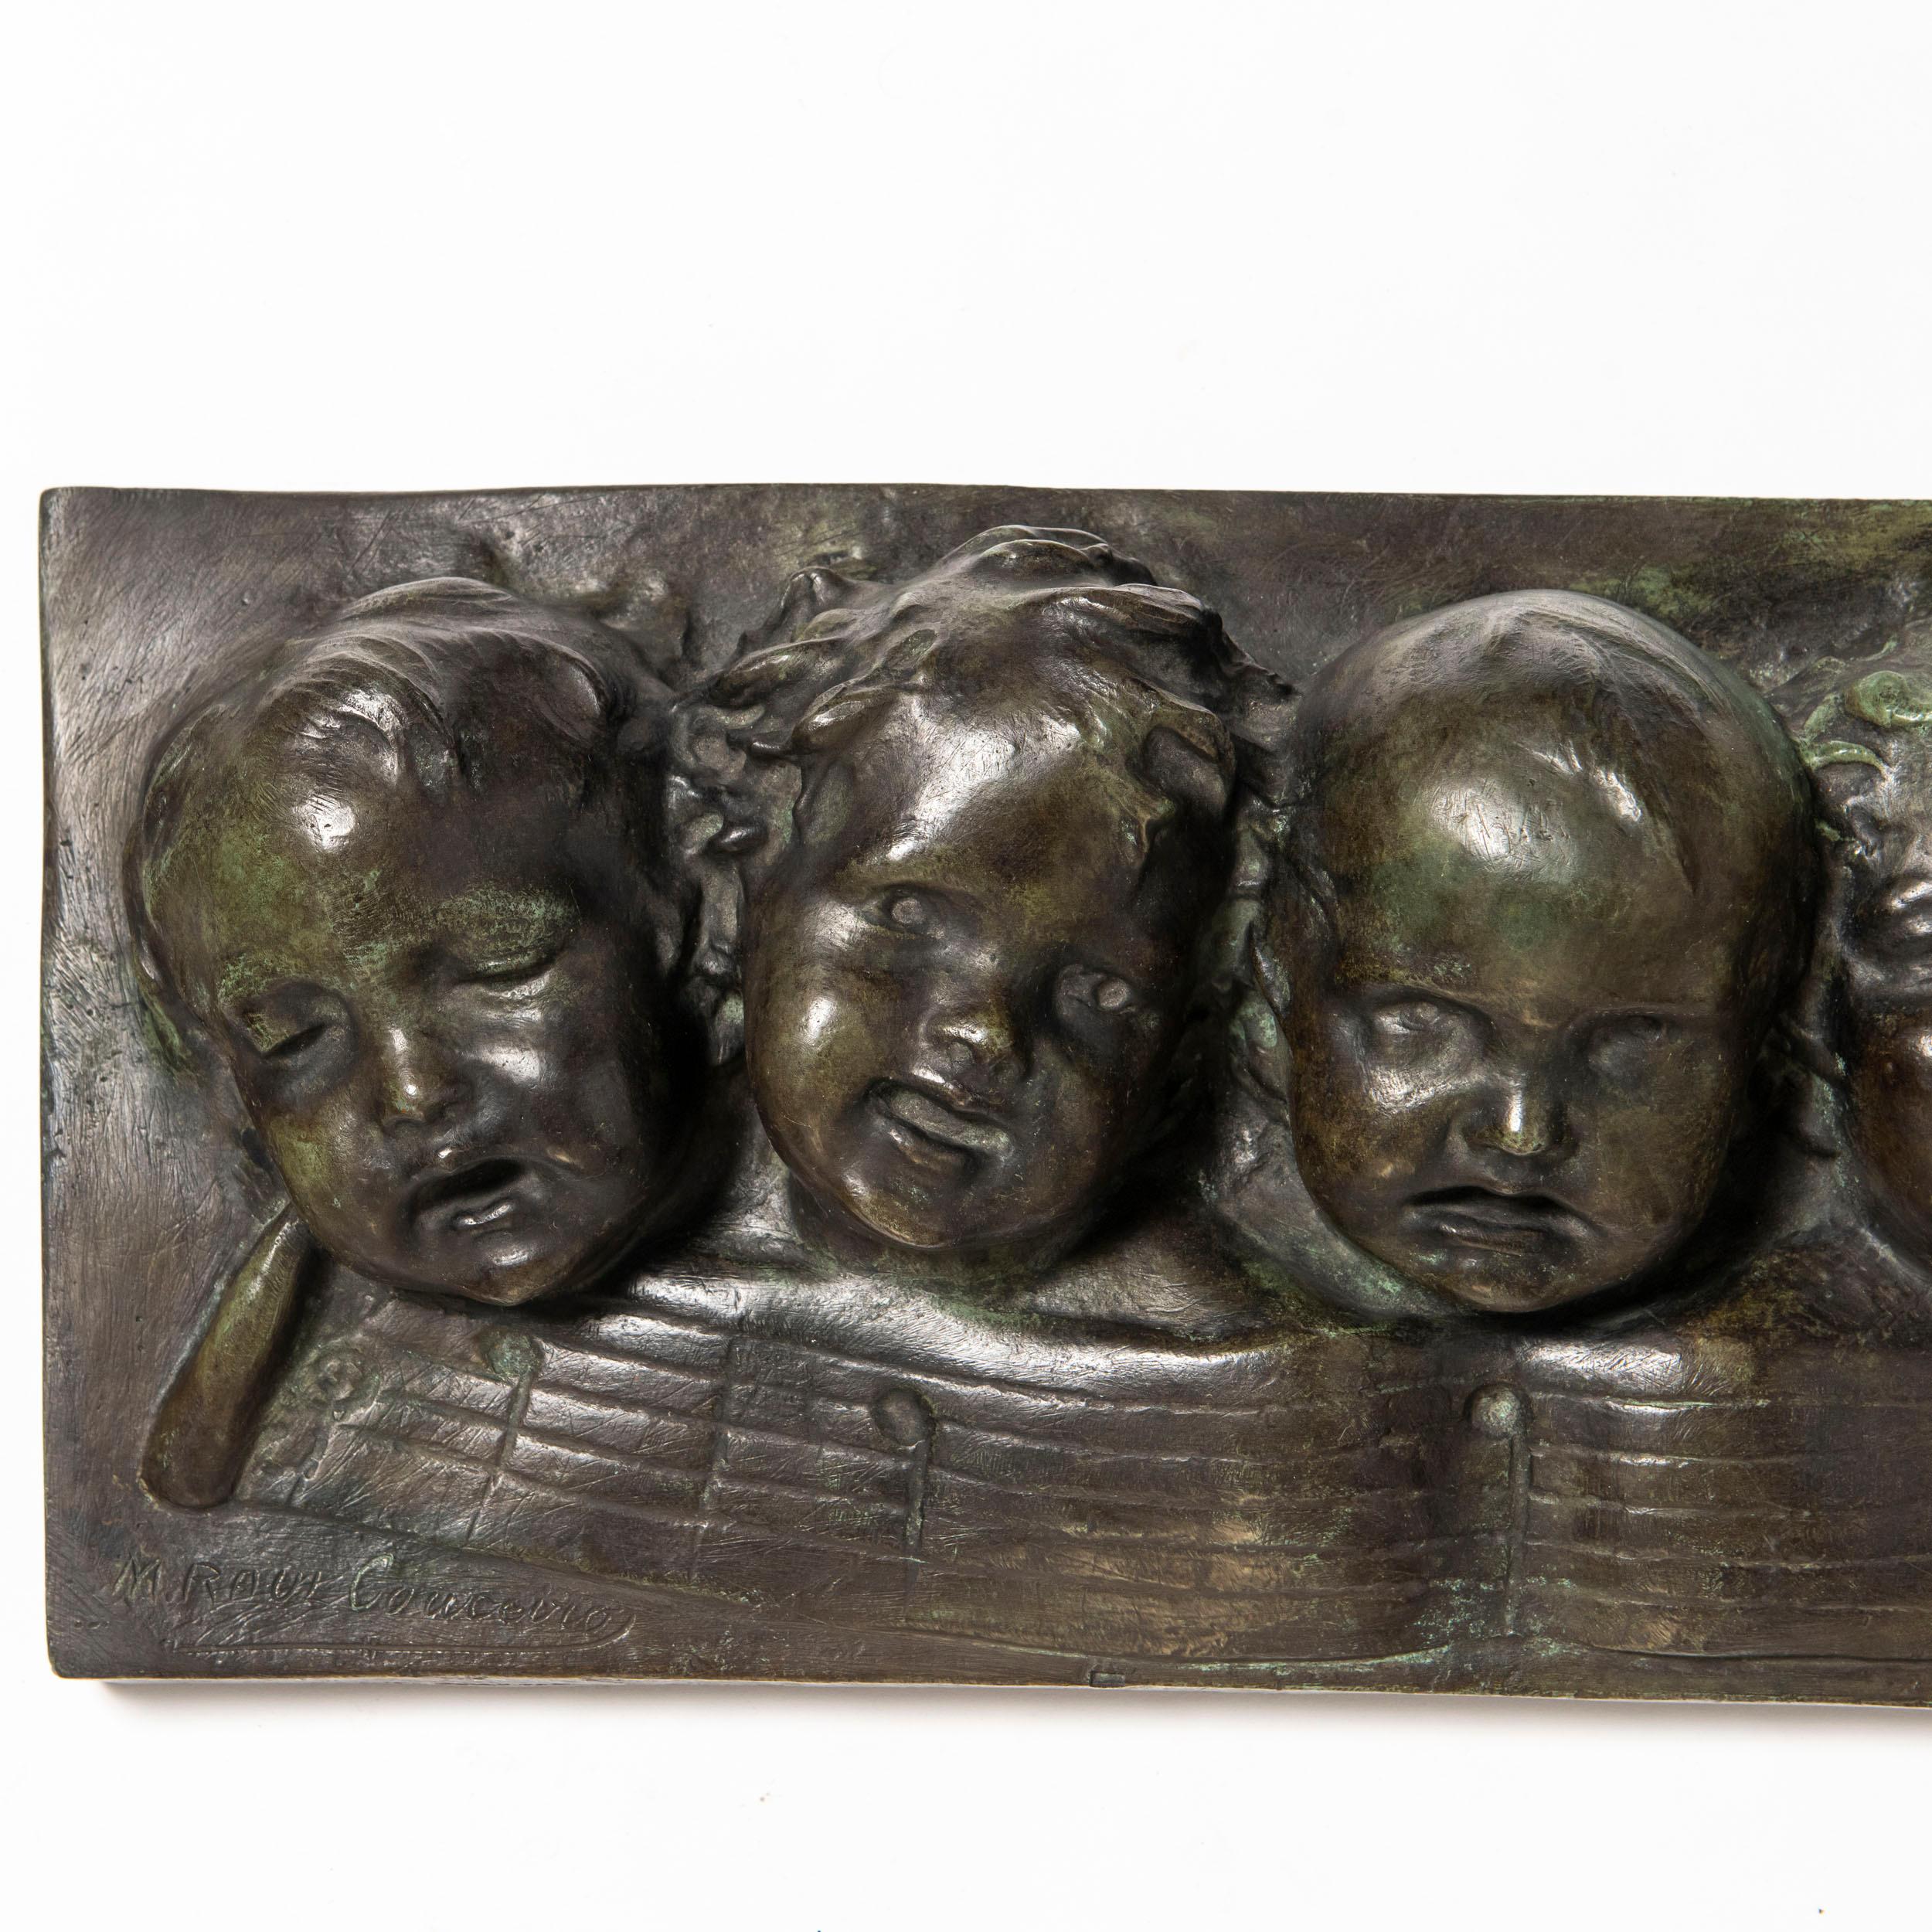 Cast bronze wall sculpture with seven children chorus. Europe, early 20th century.
Signed M. Raúl Couceiro.